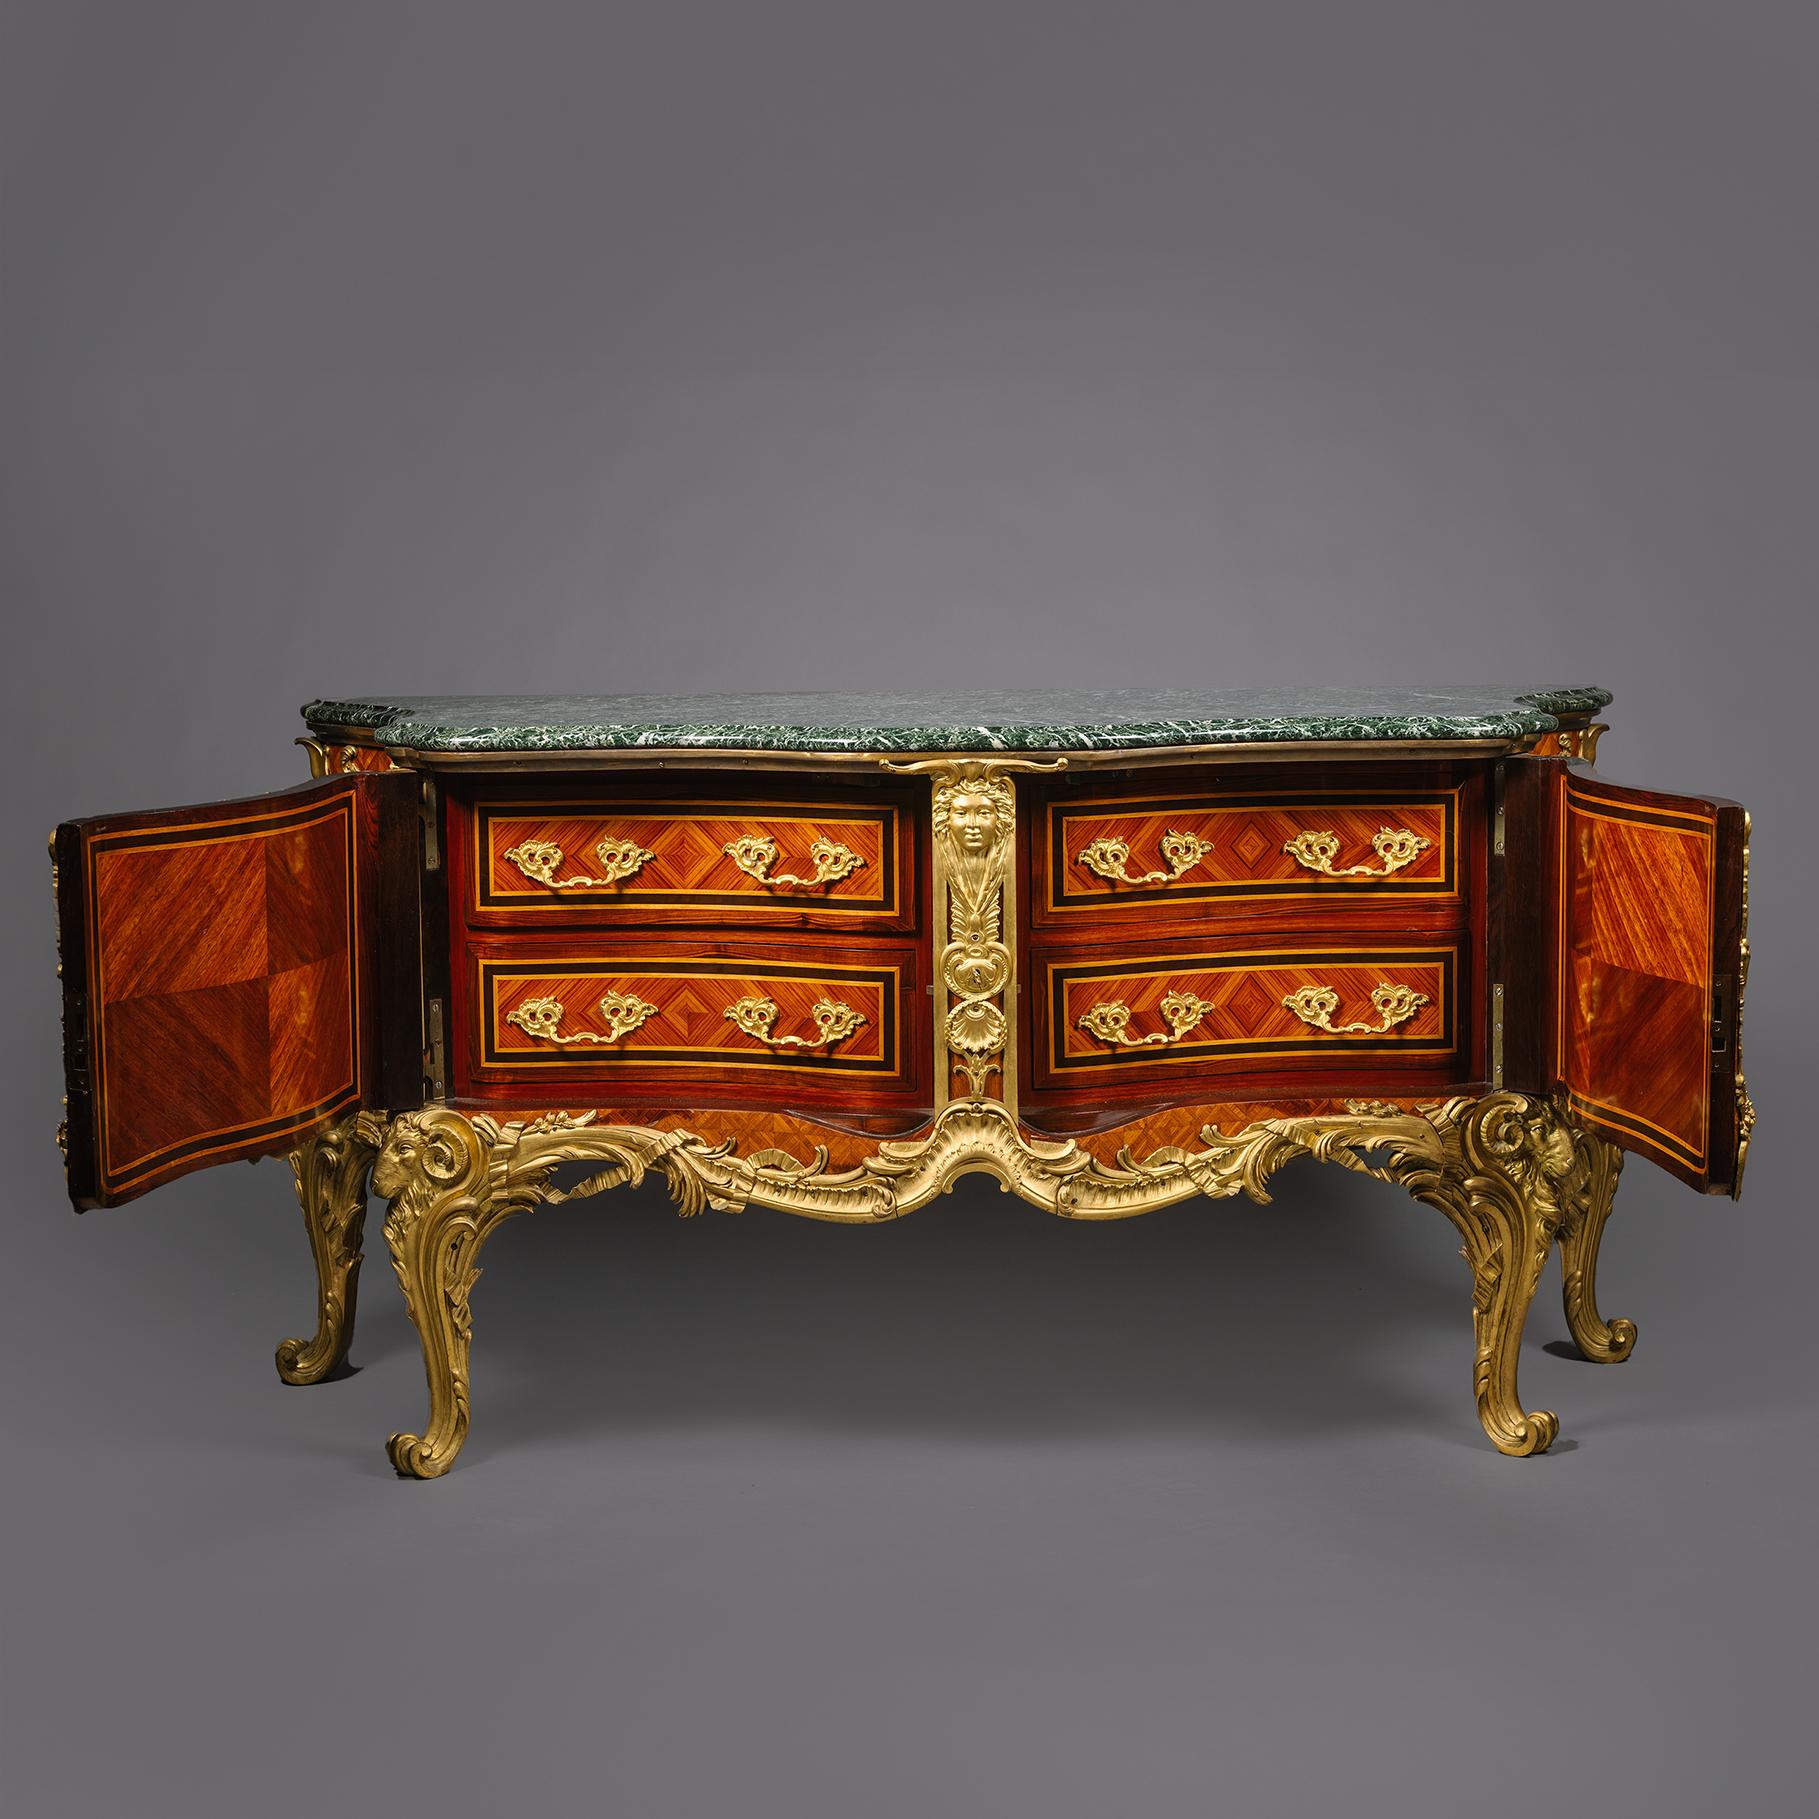 A Magnificent Gilt-Bronze Mounted Parquetry Commode, After Antoine Gaudreaux's 'Commode Médallier'. 

The serpentine Vert Maurin marble top above a conforming case set with two cupboard doors each decorated with lozenge parquetry. The interior